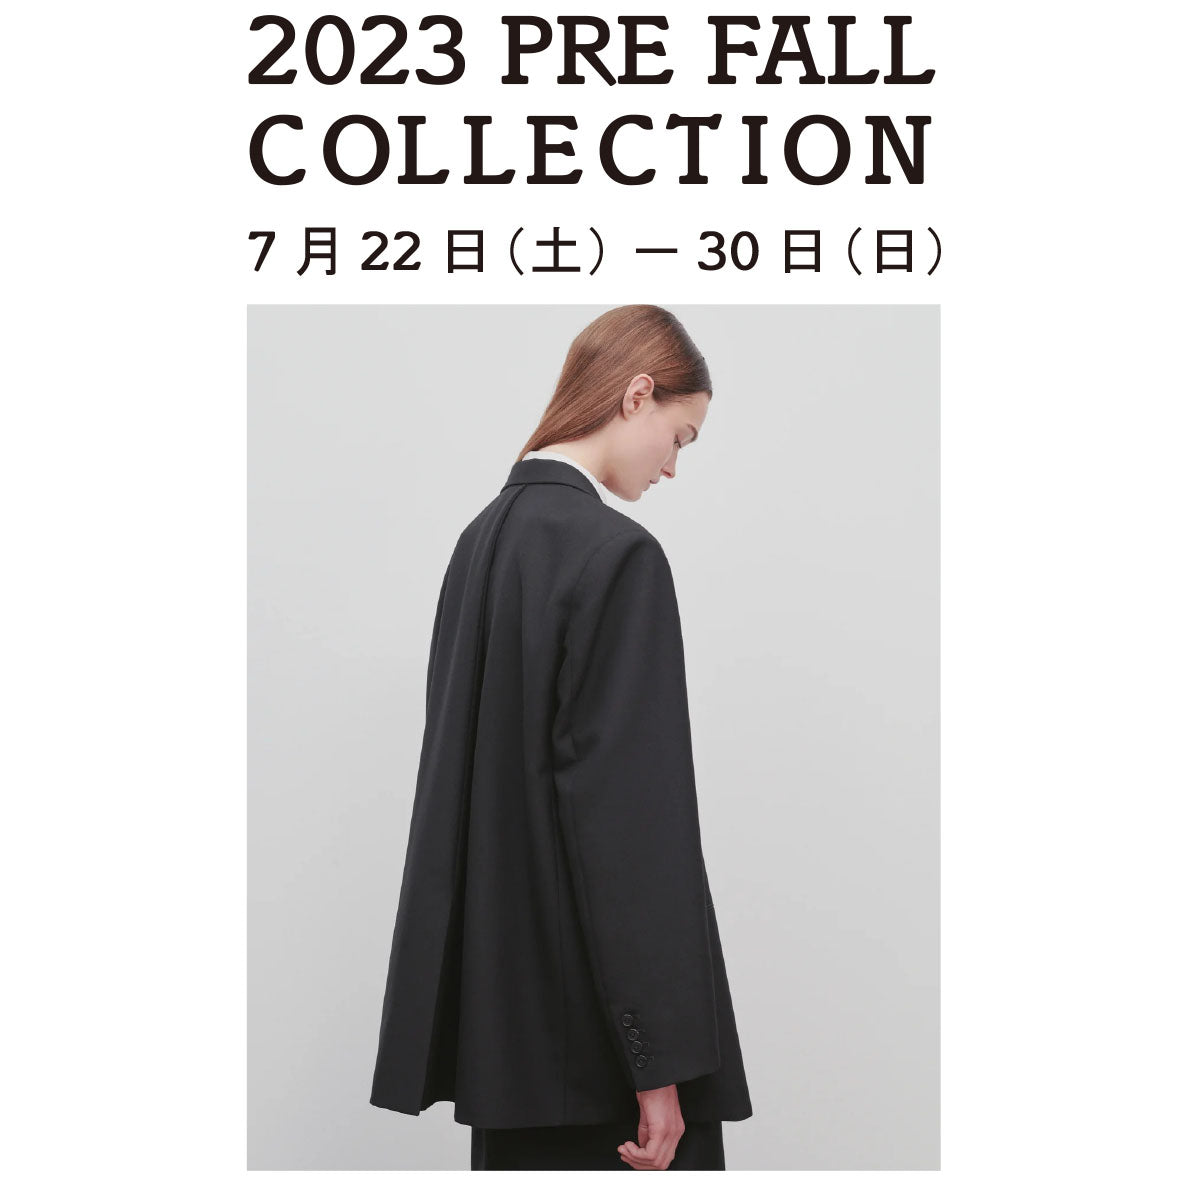 2023 PRE FALL COLLECTION